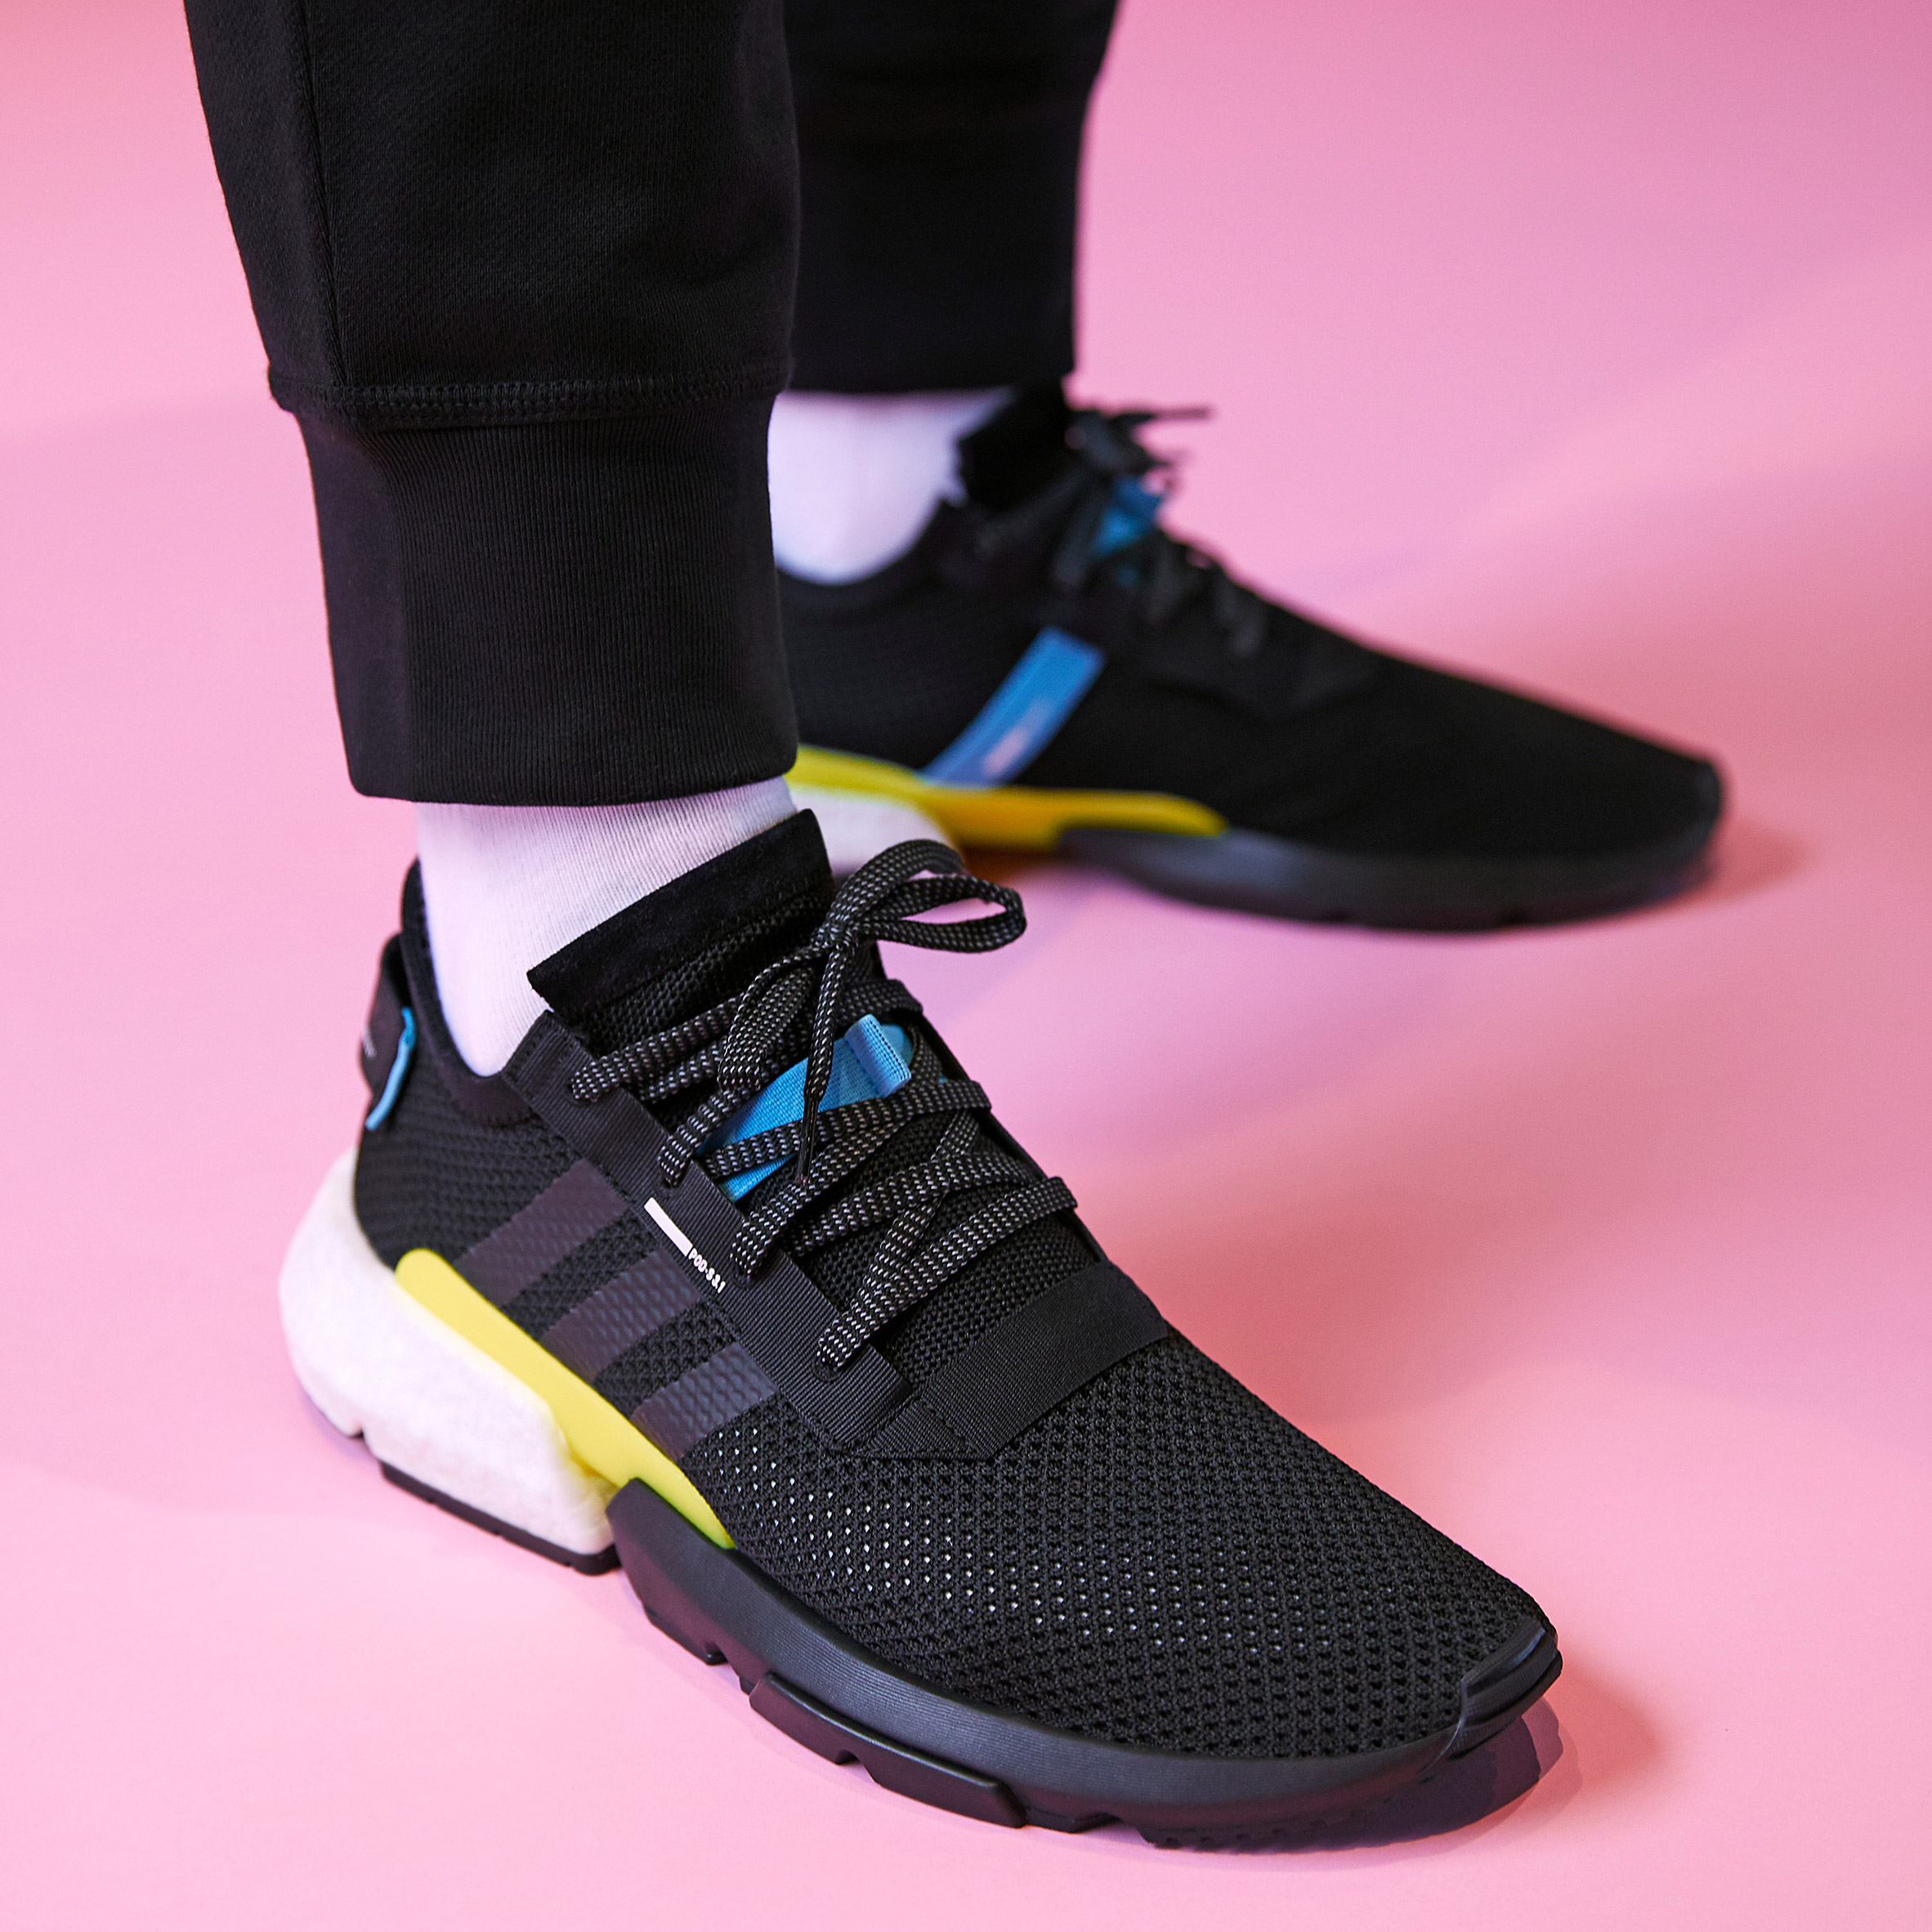 P.O.D.System shoe adidas embraces a design from the 1990s